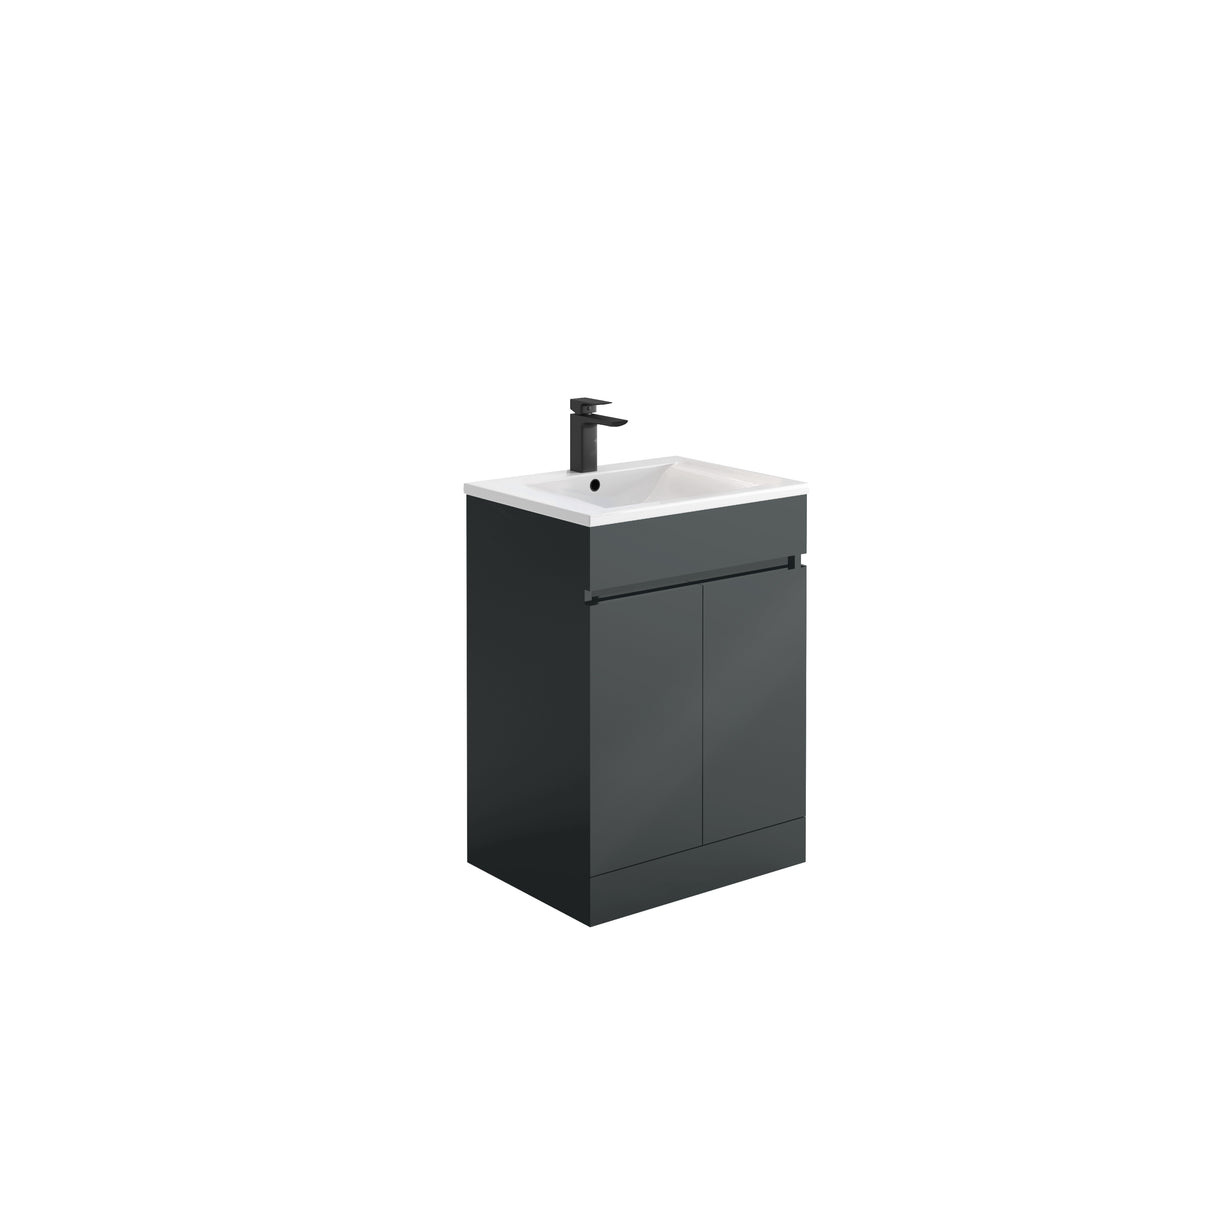 Empire Floor Standing Vanity Unit Including Basin - 2 Sizes + 4 Colours !